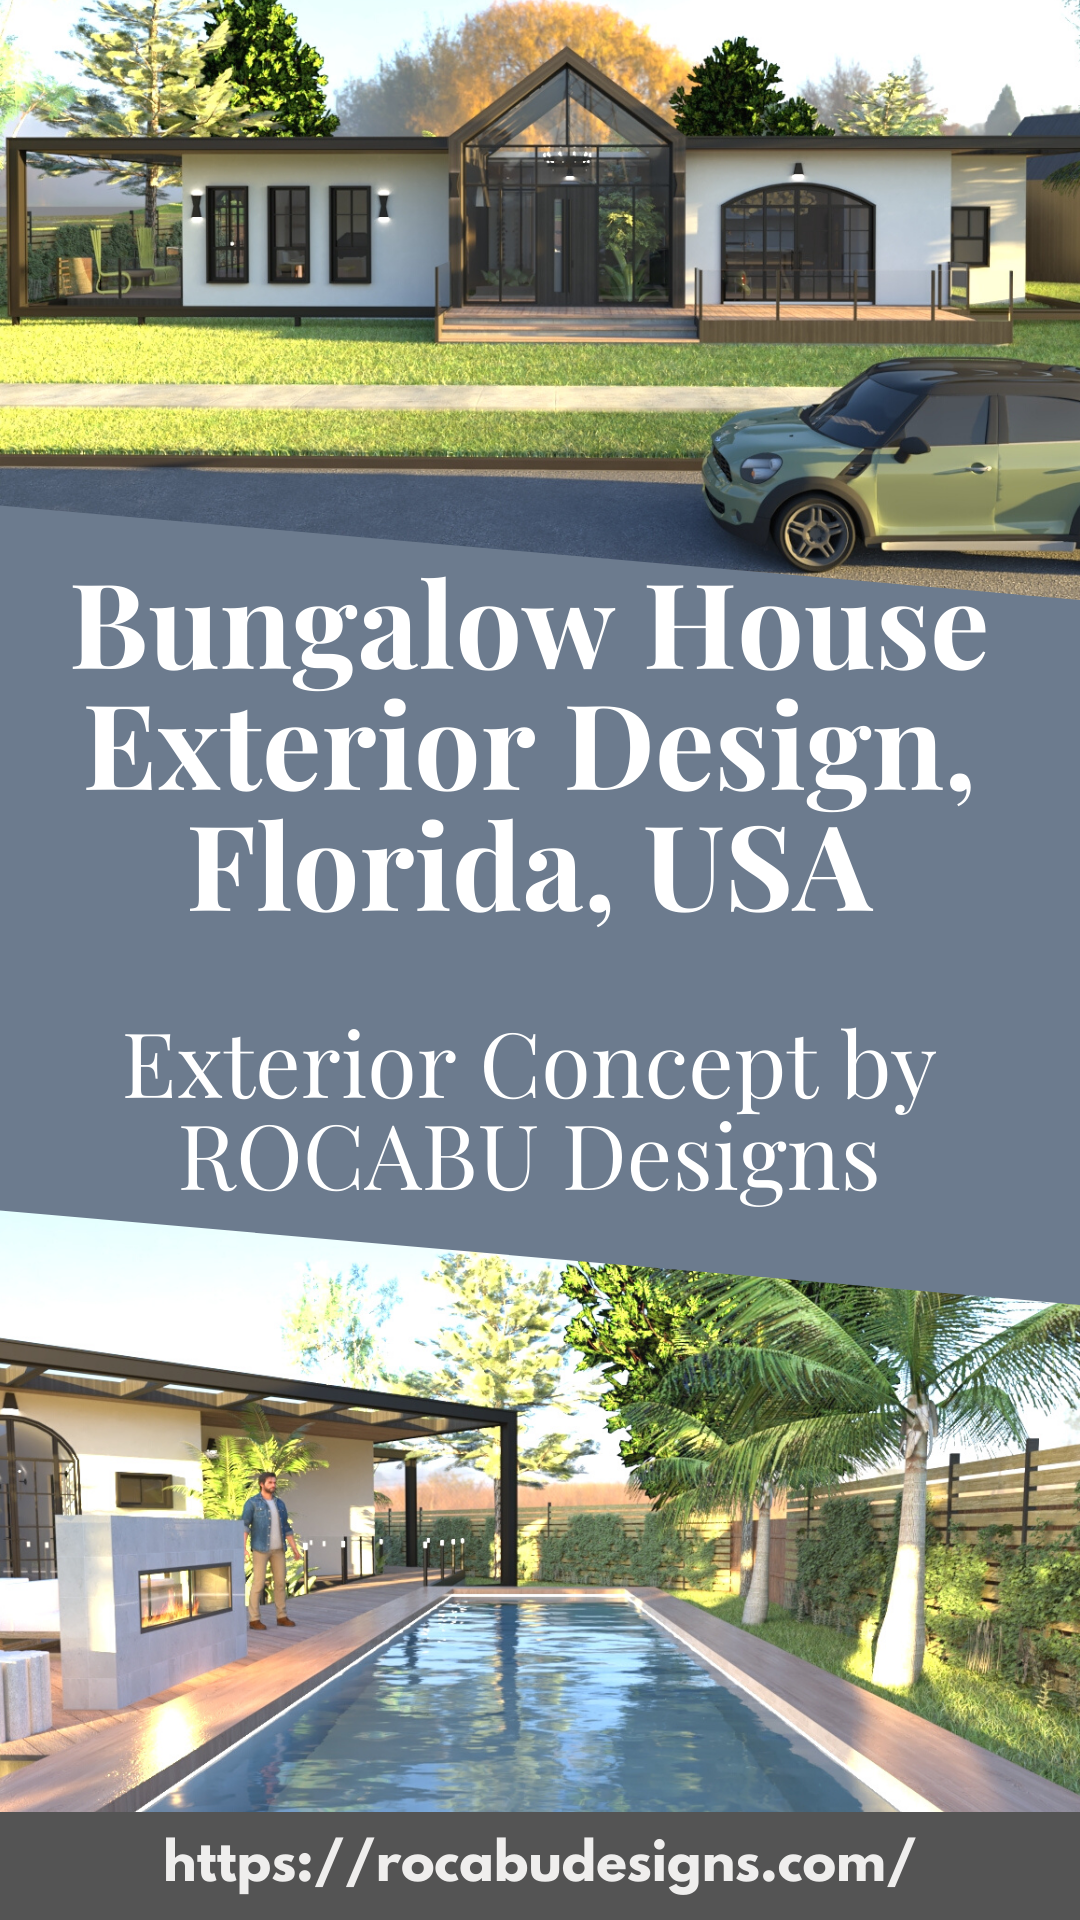 blog cover image showing renderings of bungalow house designed by Rocabu designs